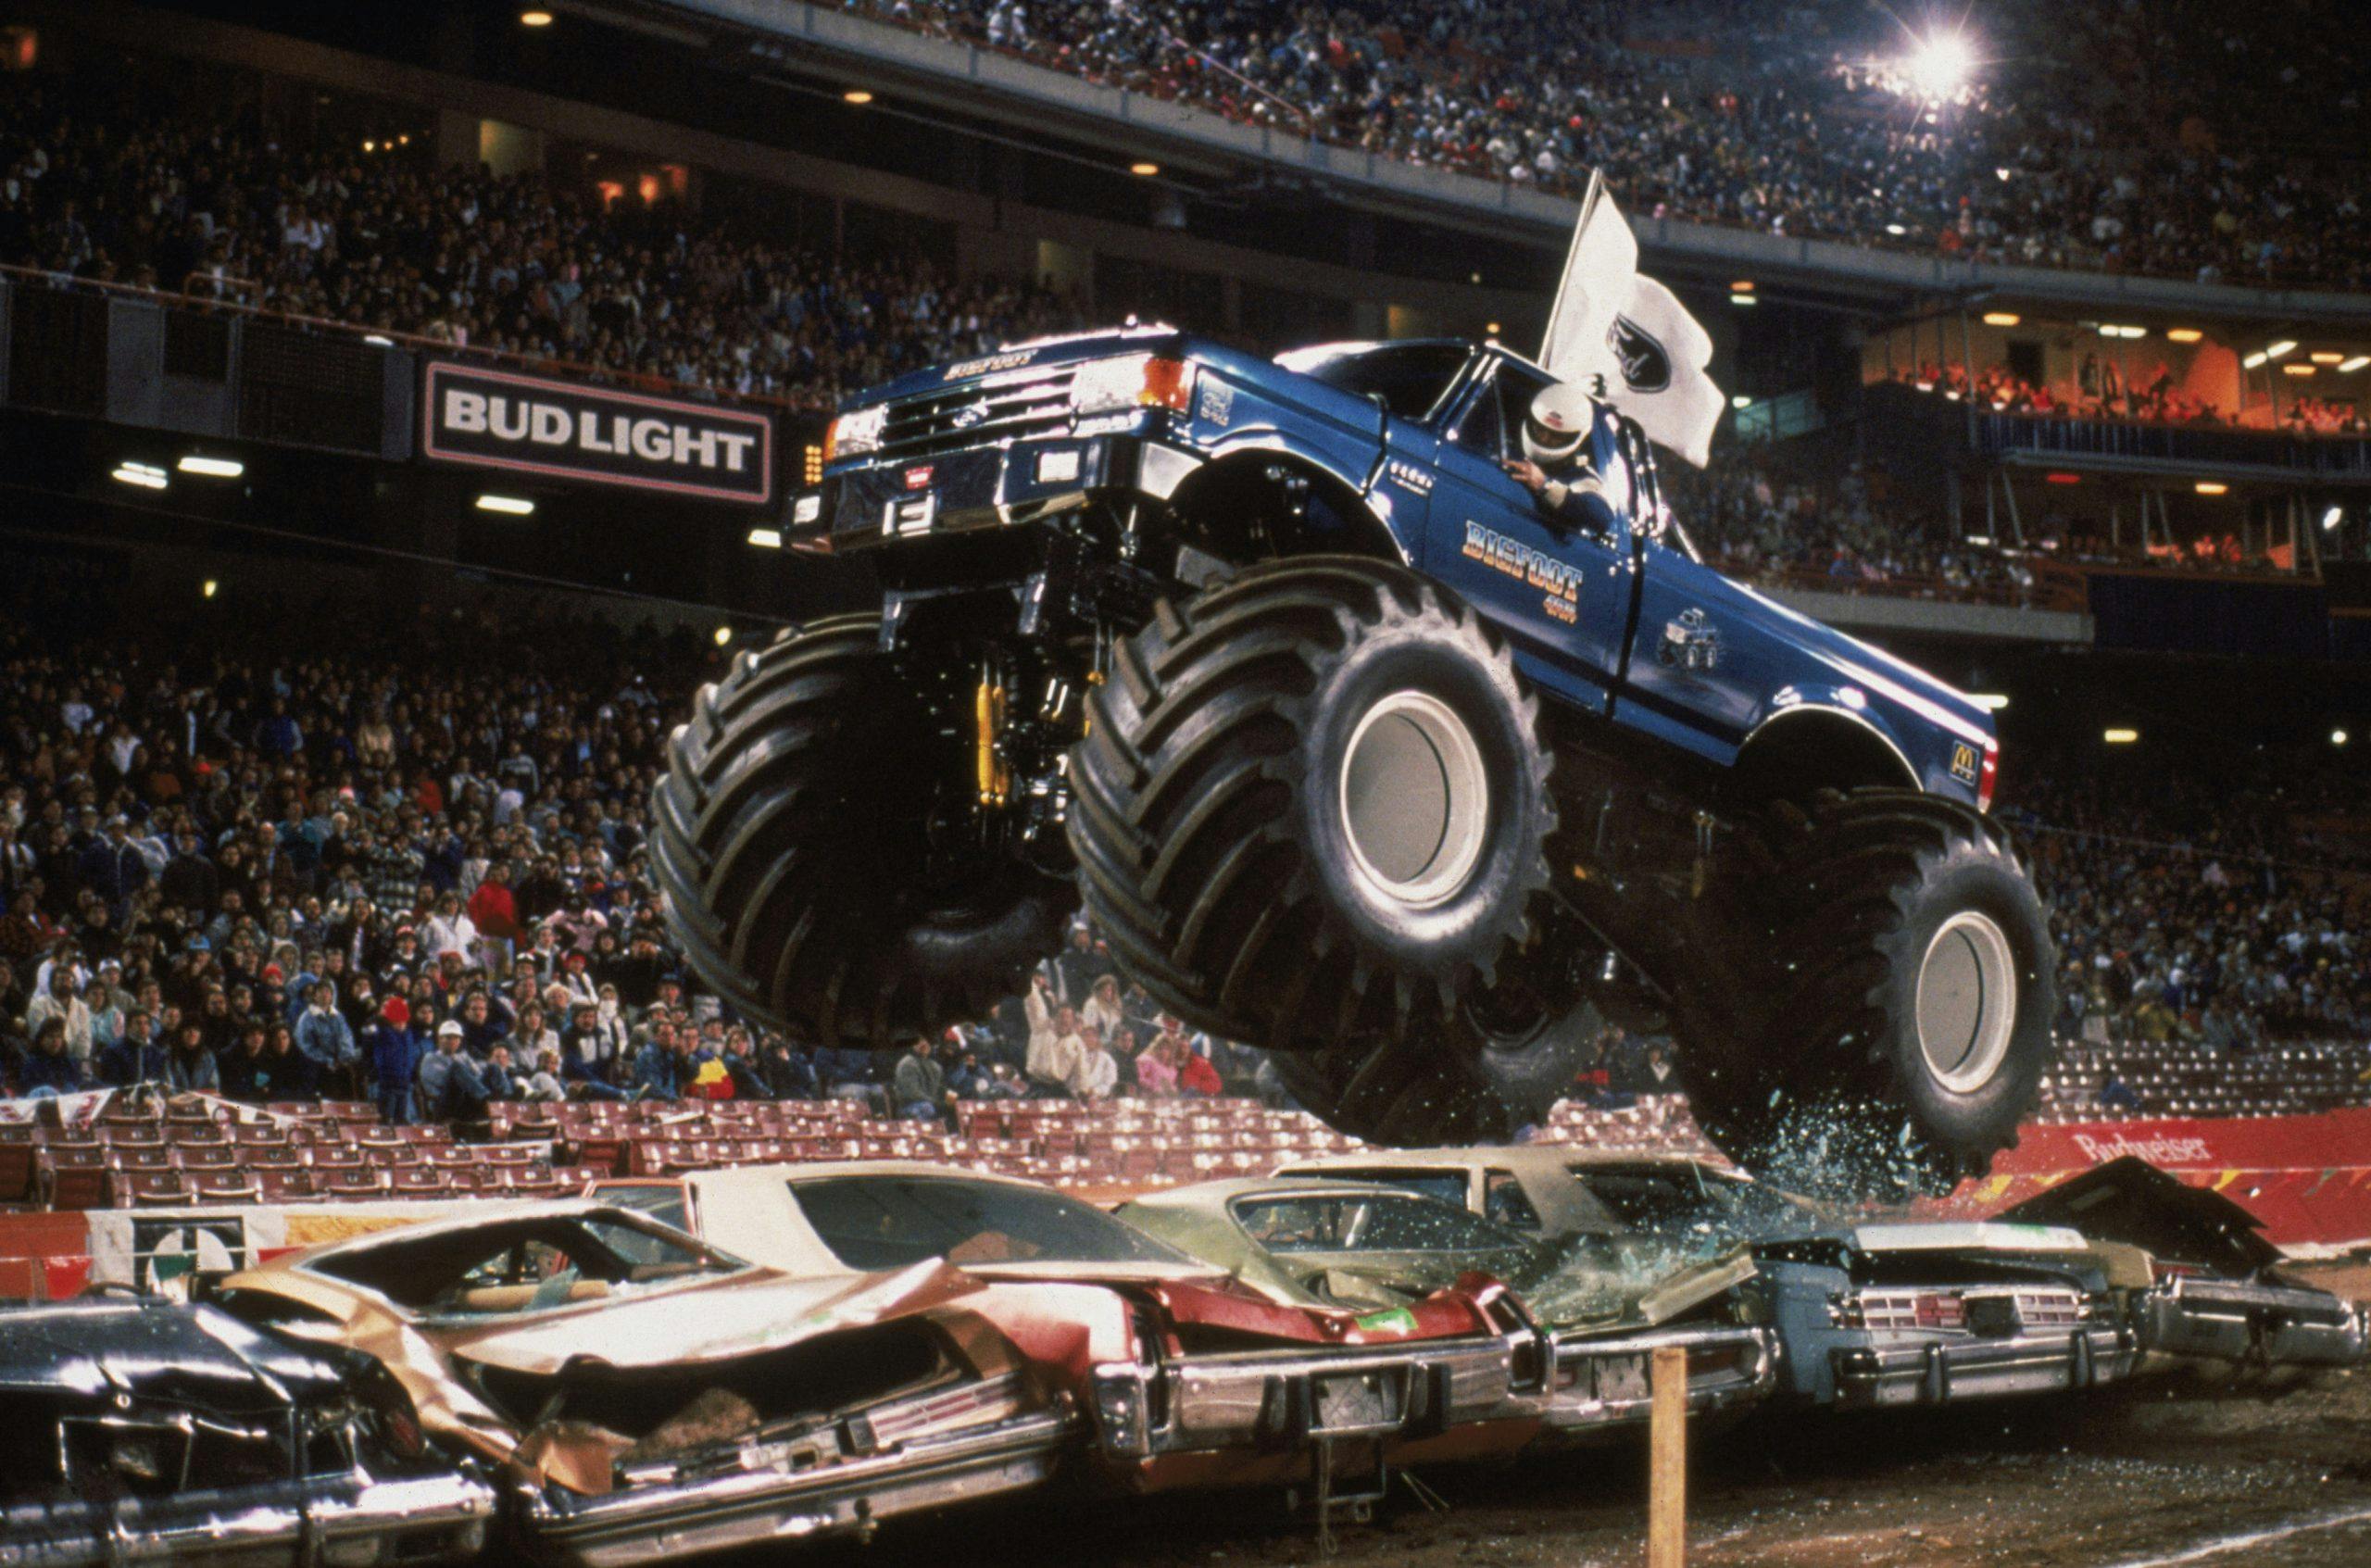 Monster Trucks Movie - Race you to the finish line! Don't miss